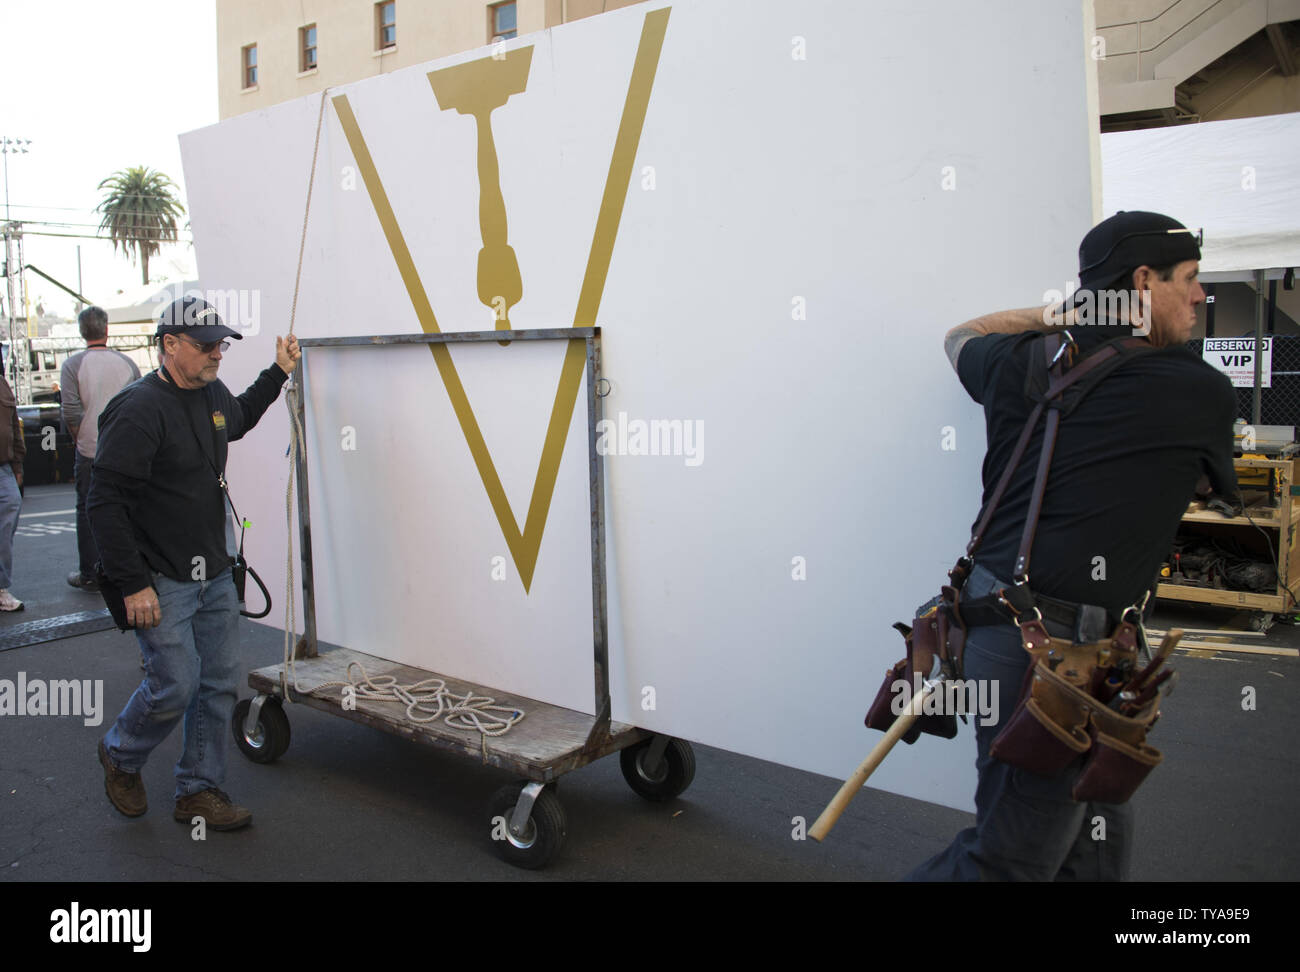 Workers move Oscar signage as preparations are underway for the 89th annual Academy Awards in the Hollywood section of Los Angeles on February 23, 2017. The 2017 Academy Awards will take place this Sunday. Photo by Kevin Dietsch/UPI Stock Photo